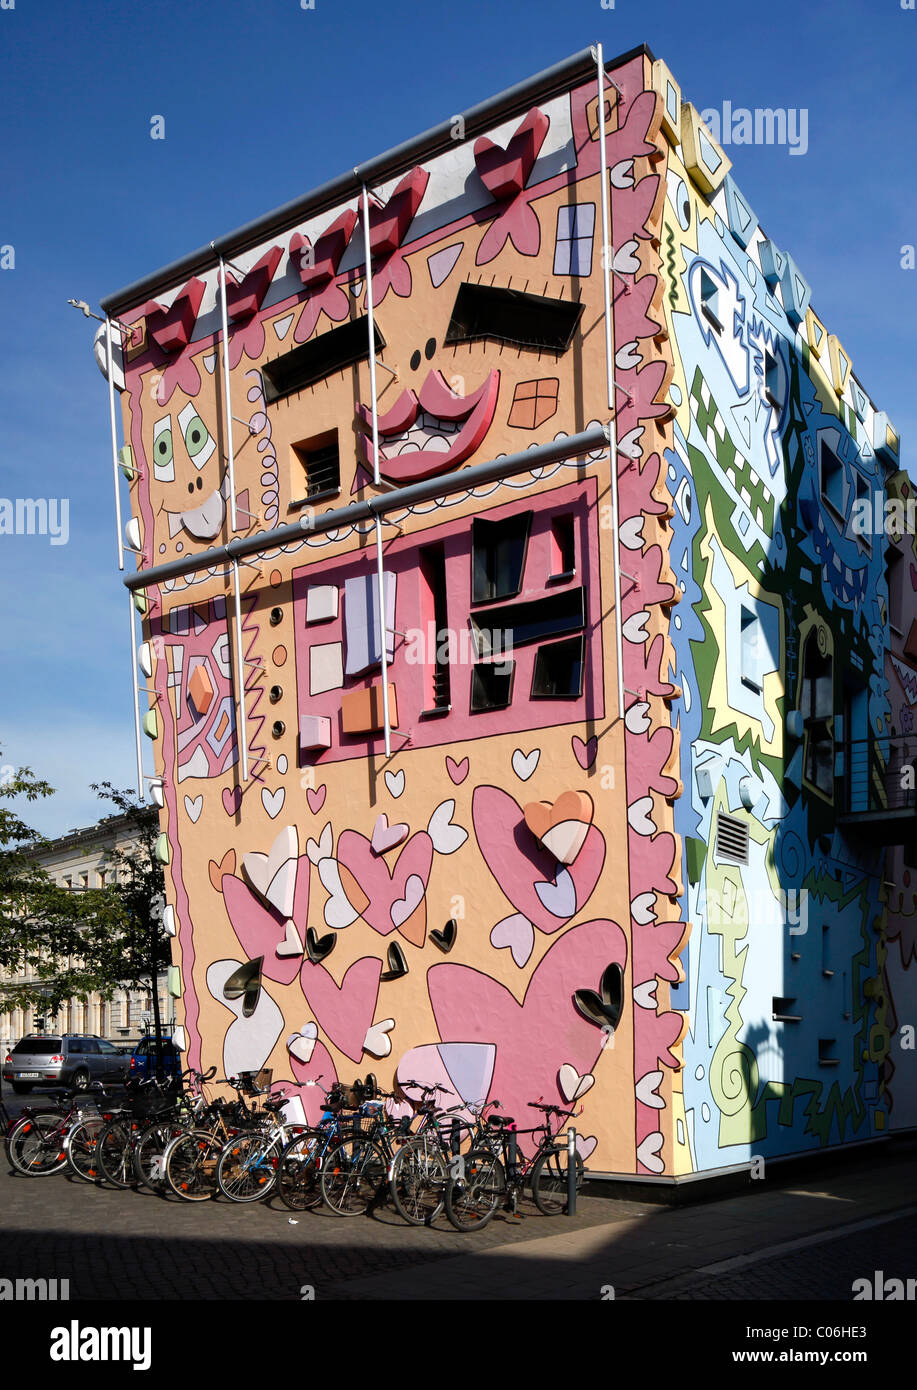 Happy-Rizzi-Haus office building, Braunschweig, Basse-Saxe, Allemagne, Europe Banque D'Images